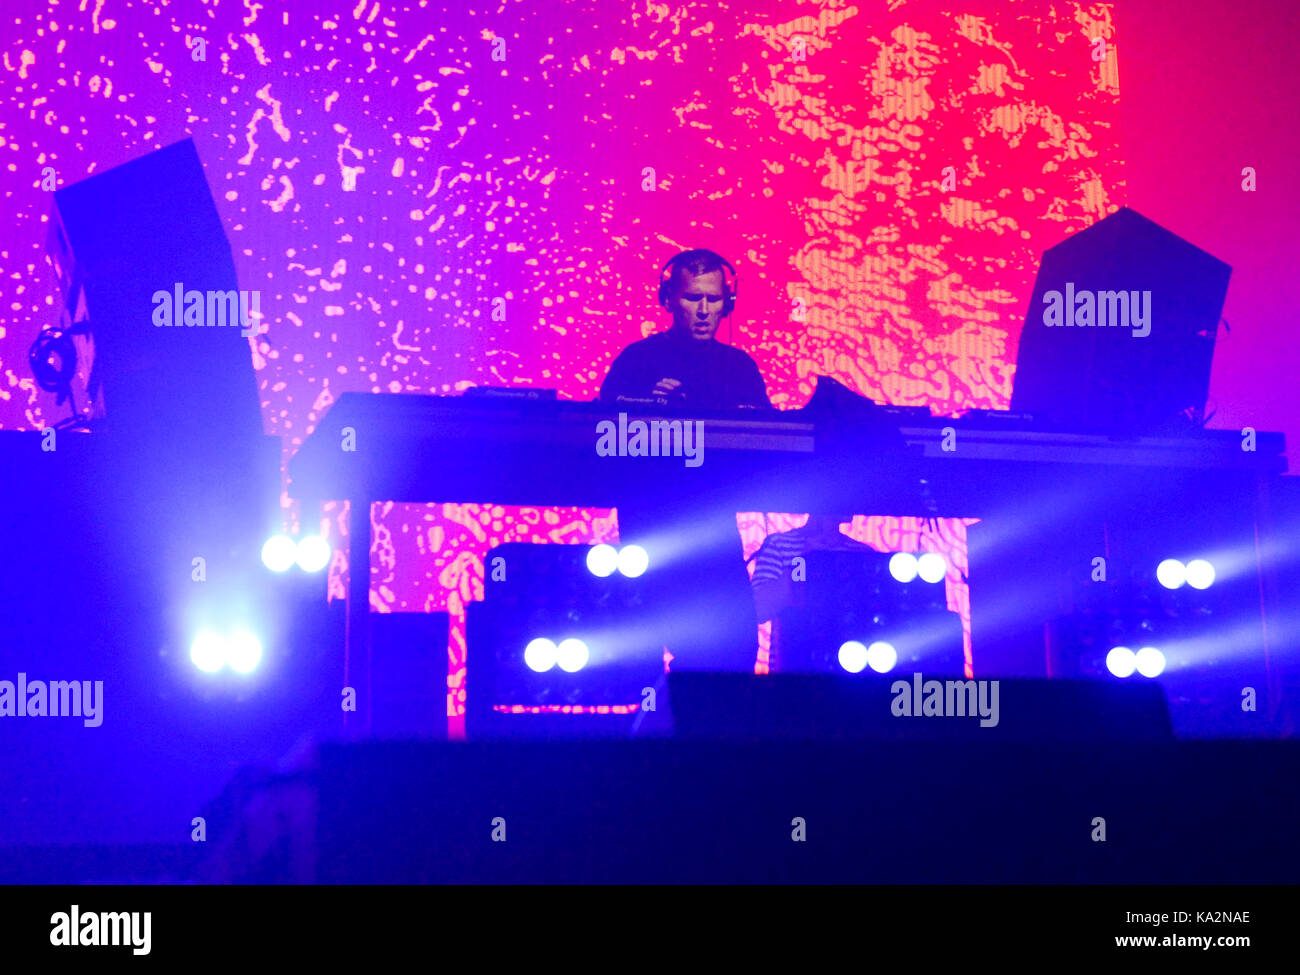 Las Vegas, USA. 23rd Sep, 2017 - Kaskade performing on stage at the Life is Beautiful festival, day 2,  downtown Las Vegas, Nevada - Photo Credit: Ken Howard/Alamy Live News Stock Photo